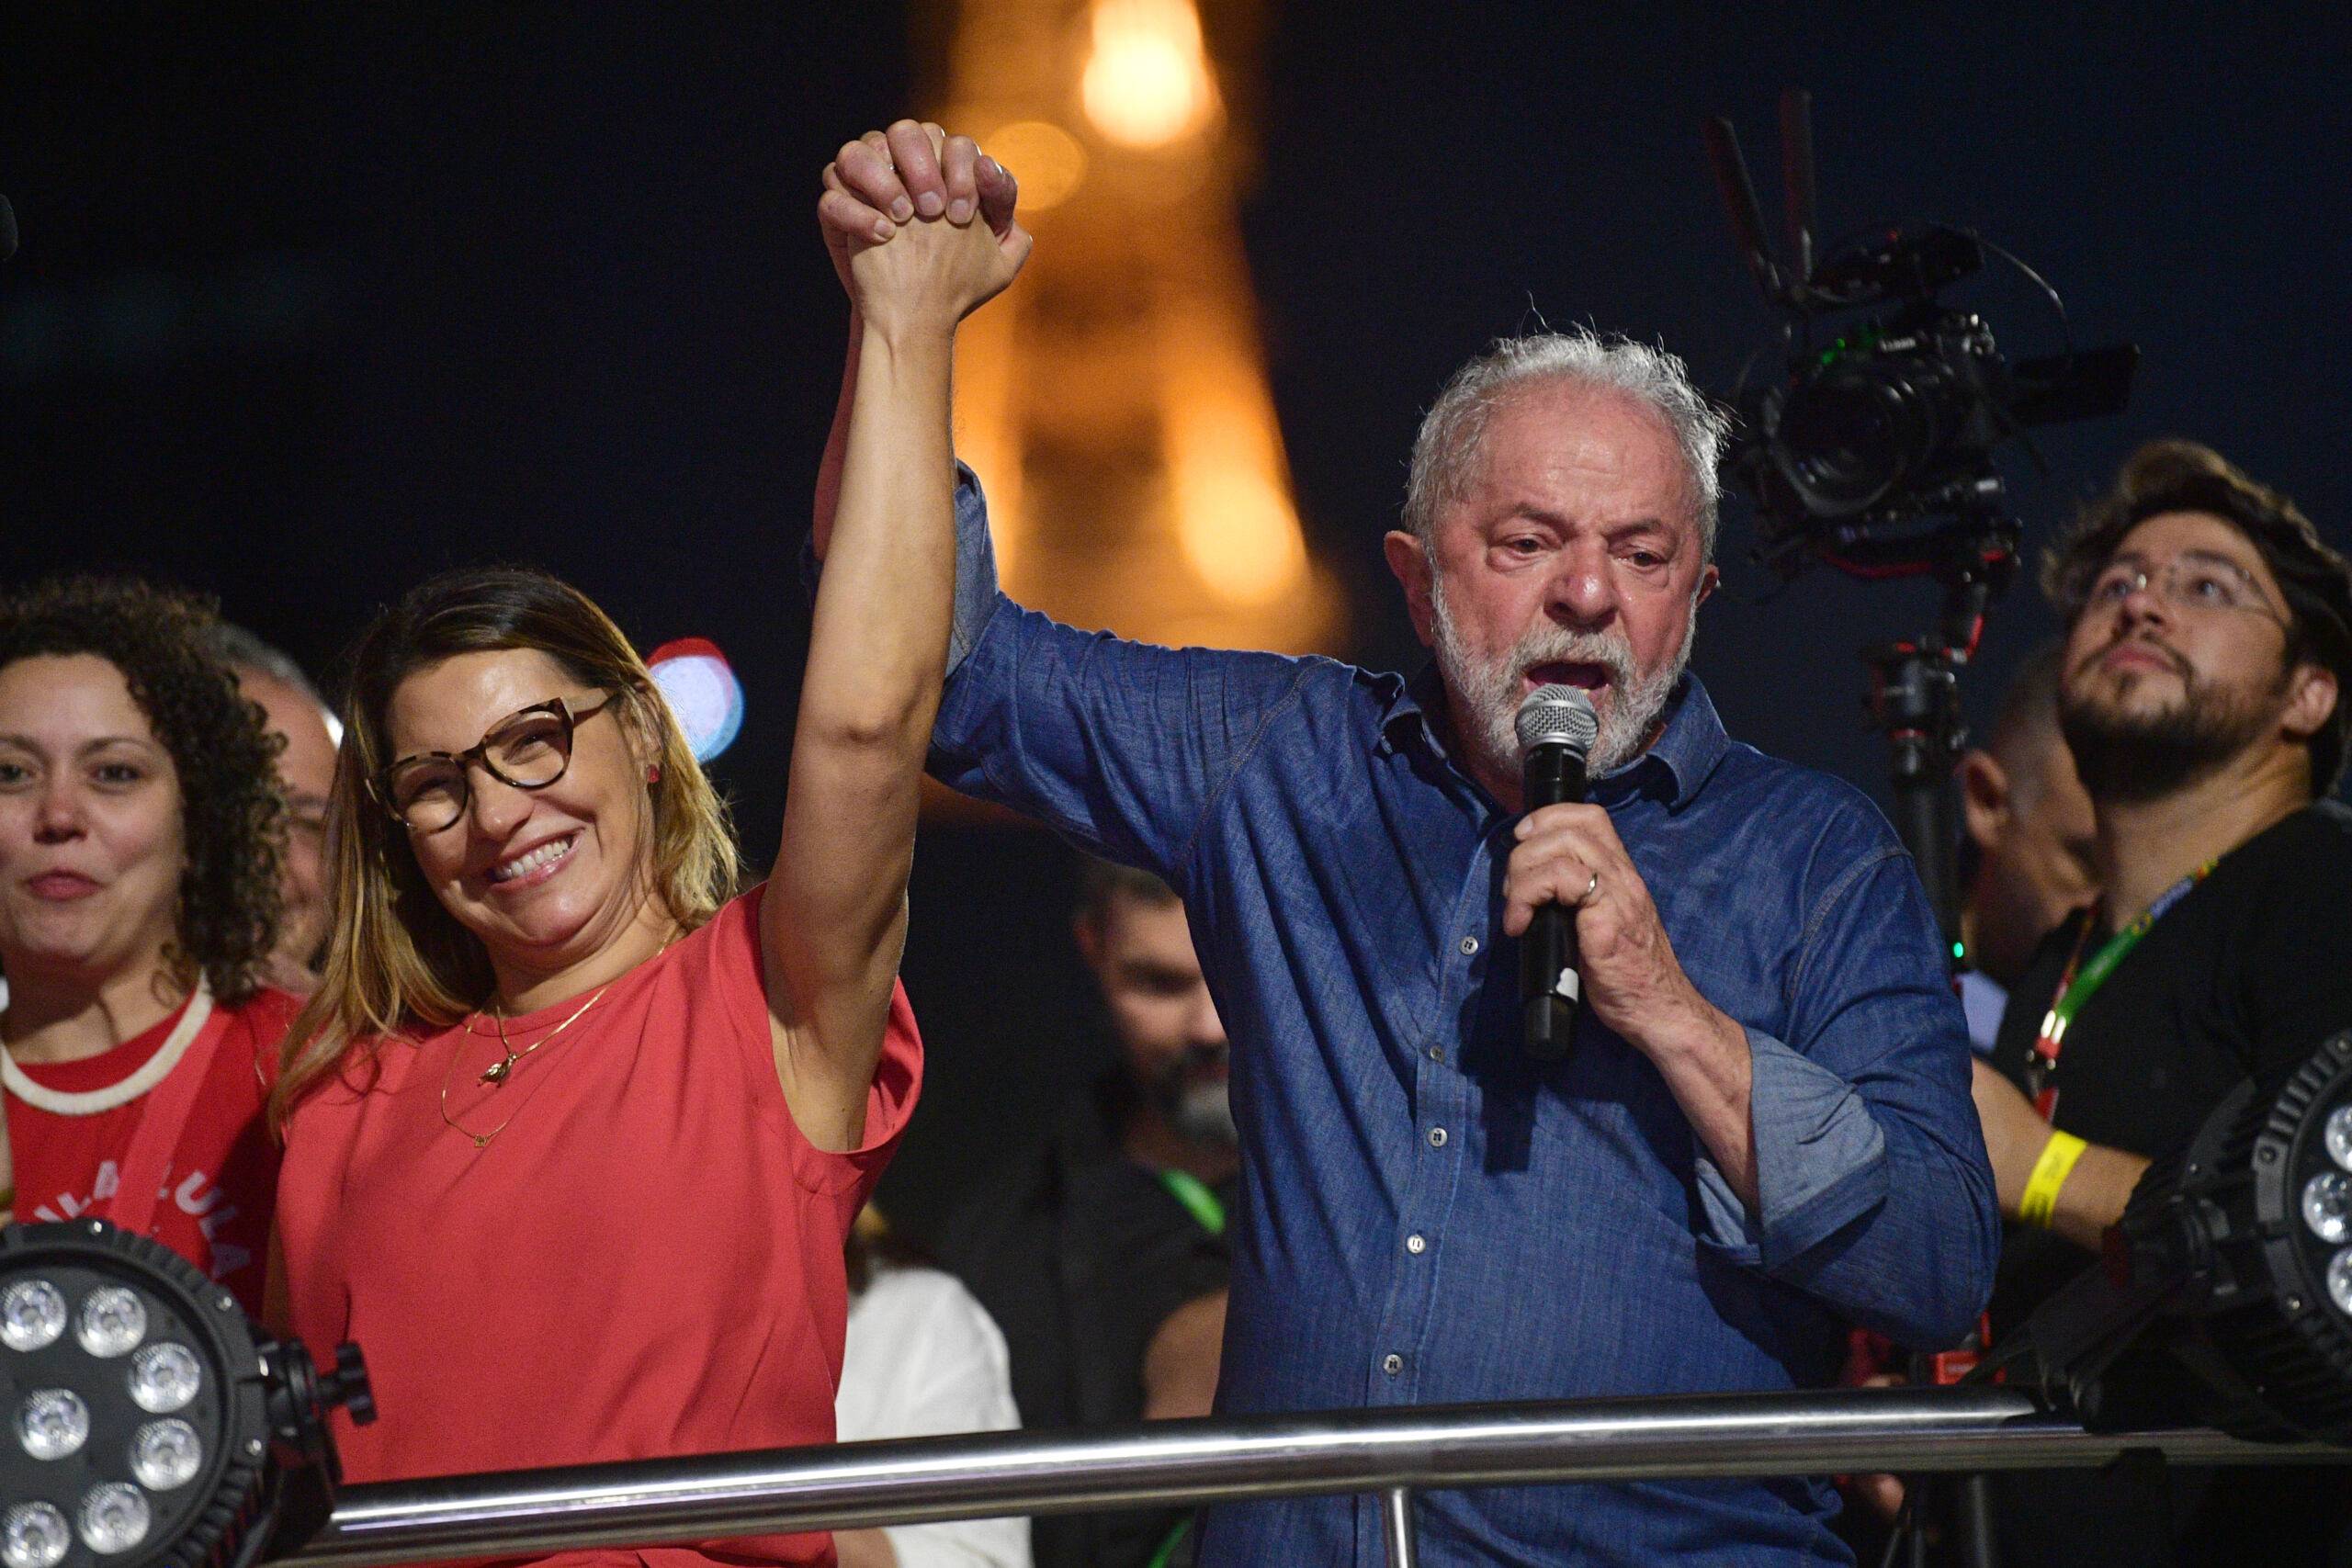 Brazilian president-elect for the leftist Workers Party (PT) Luiz Inacio Lula da Silva holds the hand of his wife, Rosangela "Janja" da Silva, while delivering a speech to supporters at the Paulista avenue after winning the presidential run-off election, in Sao Paulo, Brazil, on October 30, 2022. - Brazil's veteran leftist Luiz Inacio Lula da Silva was elected president Sunday by a hair's breadth, beating his far-right rival in a down-to-the-wire poll that split the country in two, election officials said. (Photo by CARL DE SOUZA / AFP)